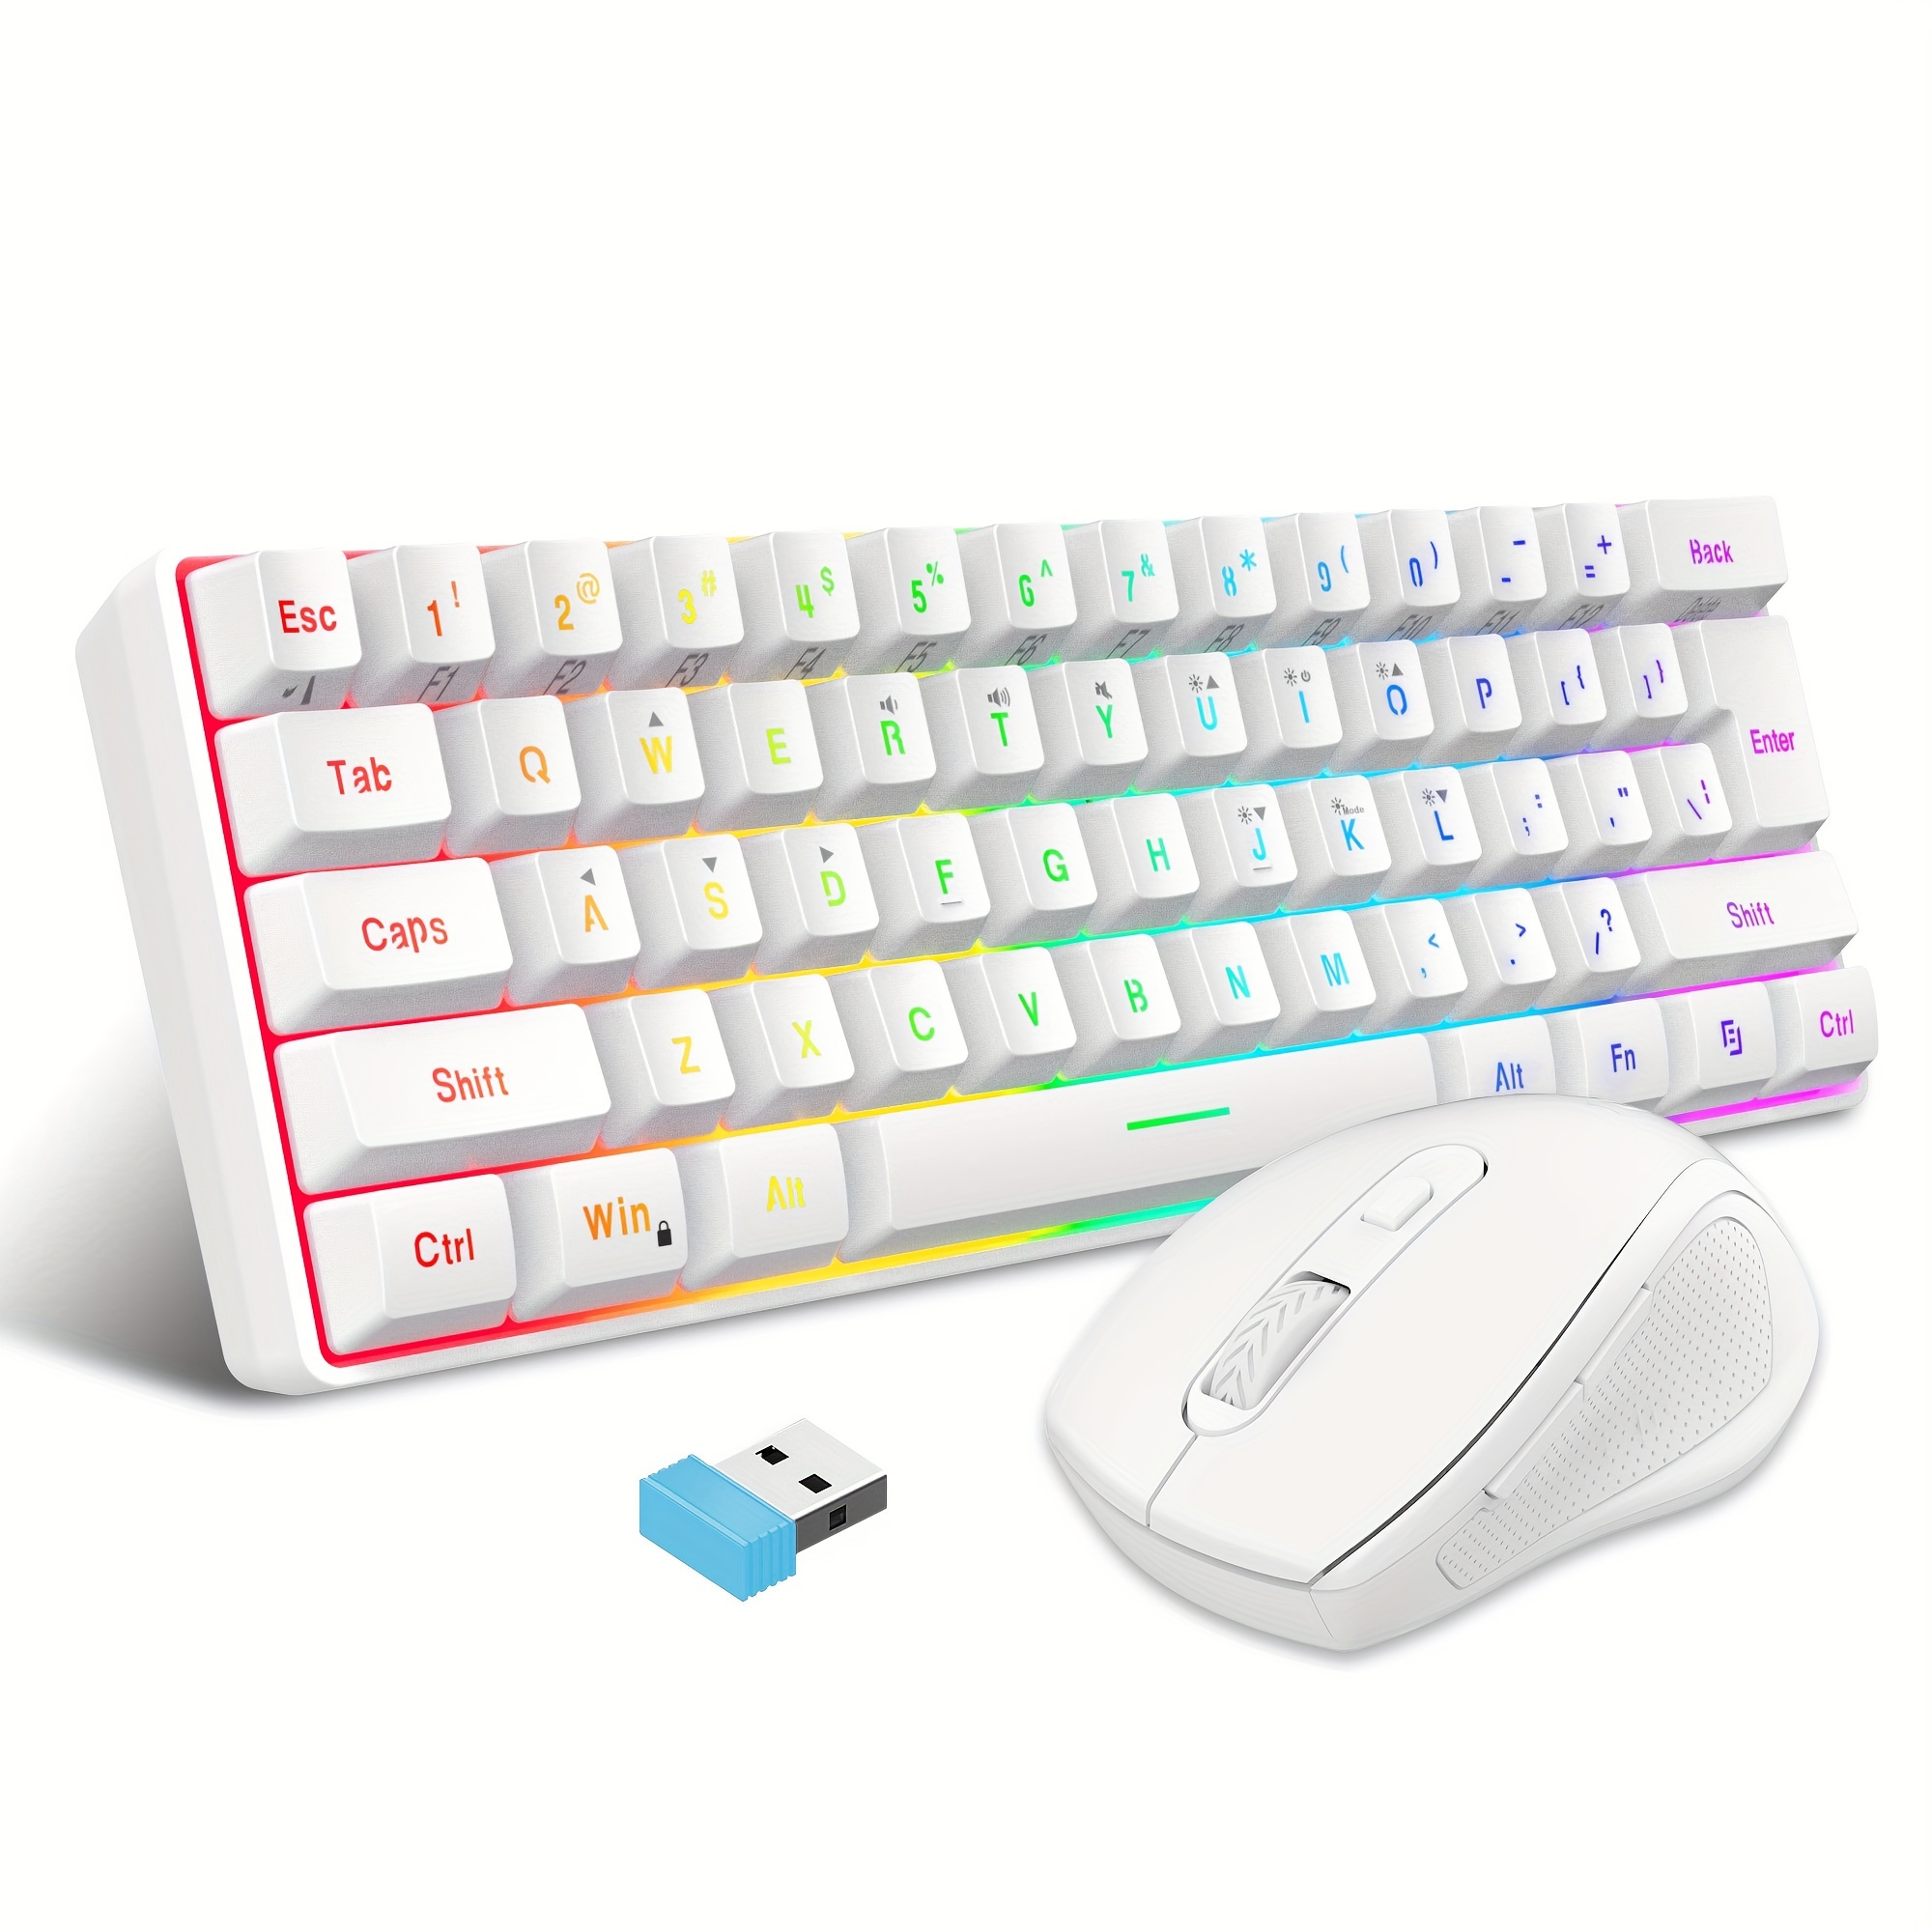 

Snpurdiri 60% Wireless Game Keyboard Rgb Light Keyboard And 2.4g Wireless Mouse Combination, Including 2.4g Small Mini Mechanical Touch Keyboard, Ergonomic Design Rechargeable